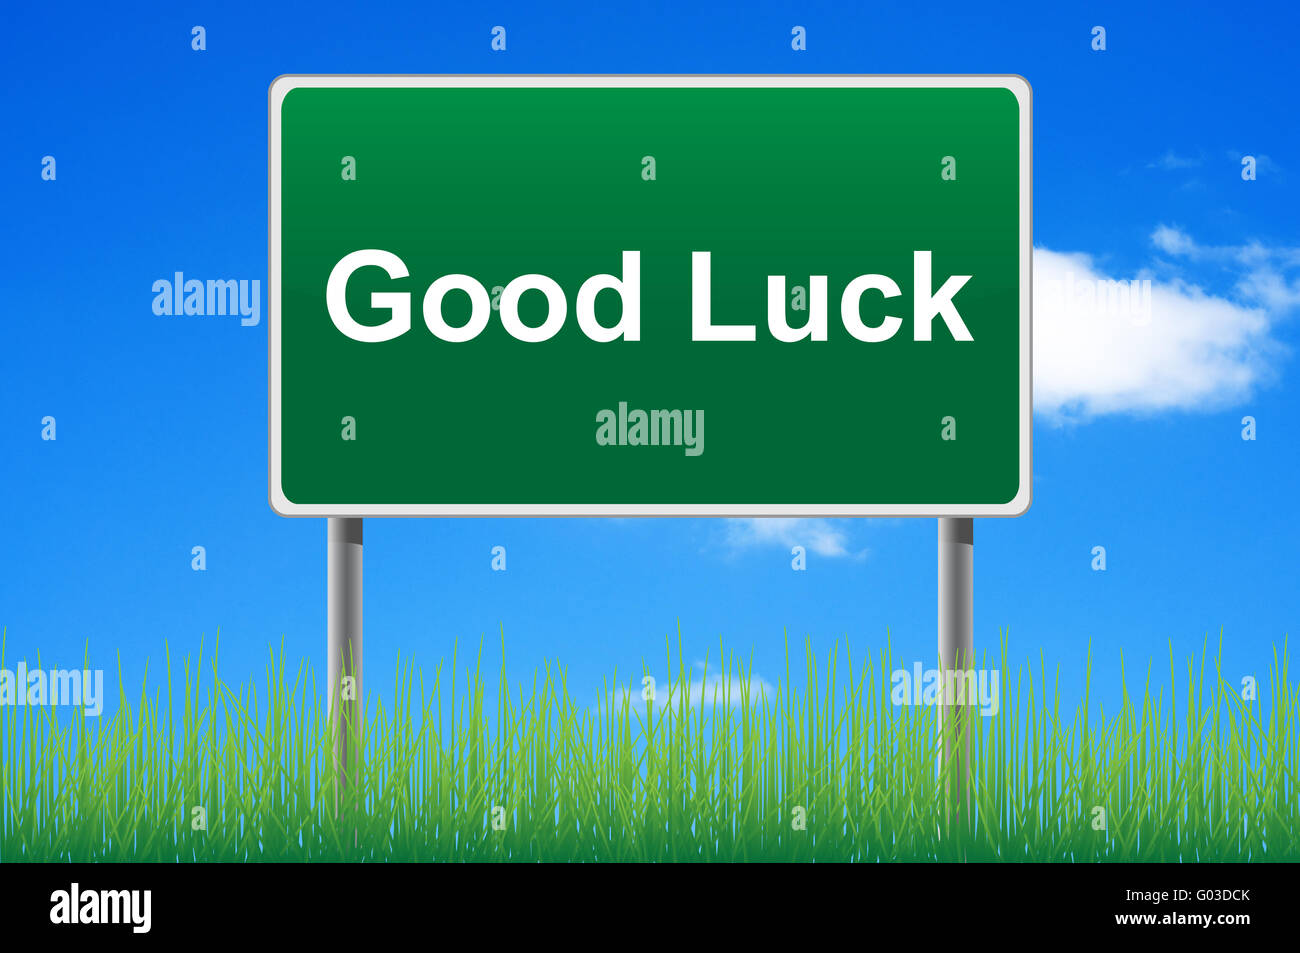 Good luck road sign on sky background. Bottom grass. Stock Photo